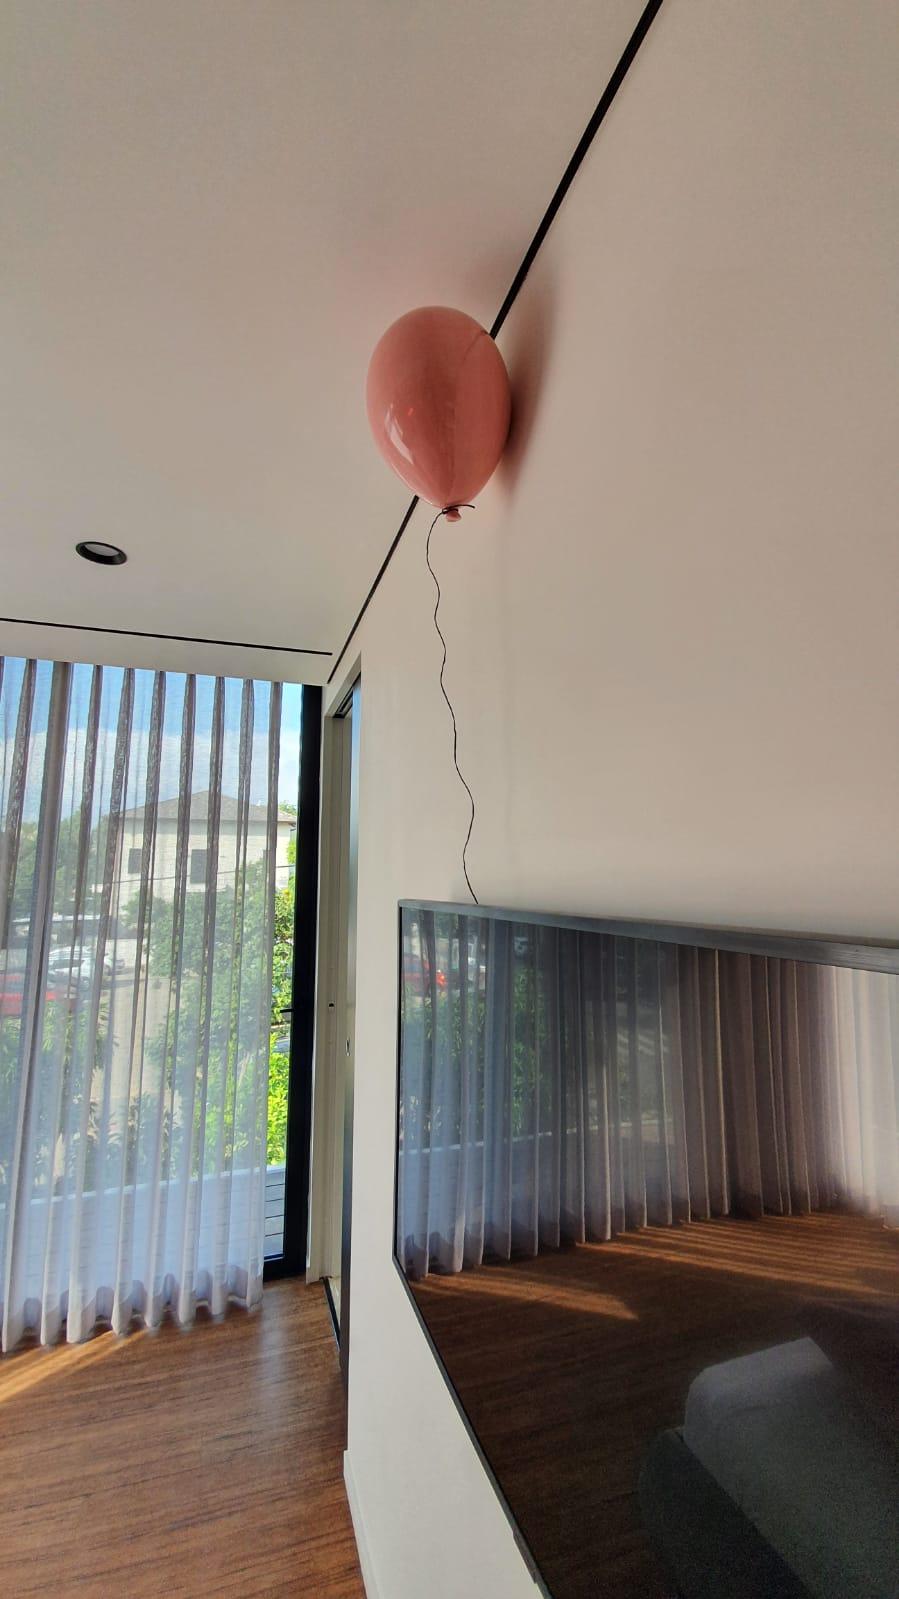  soft pink glossy ceramic balloon sculpture handmade for wall.